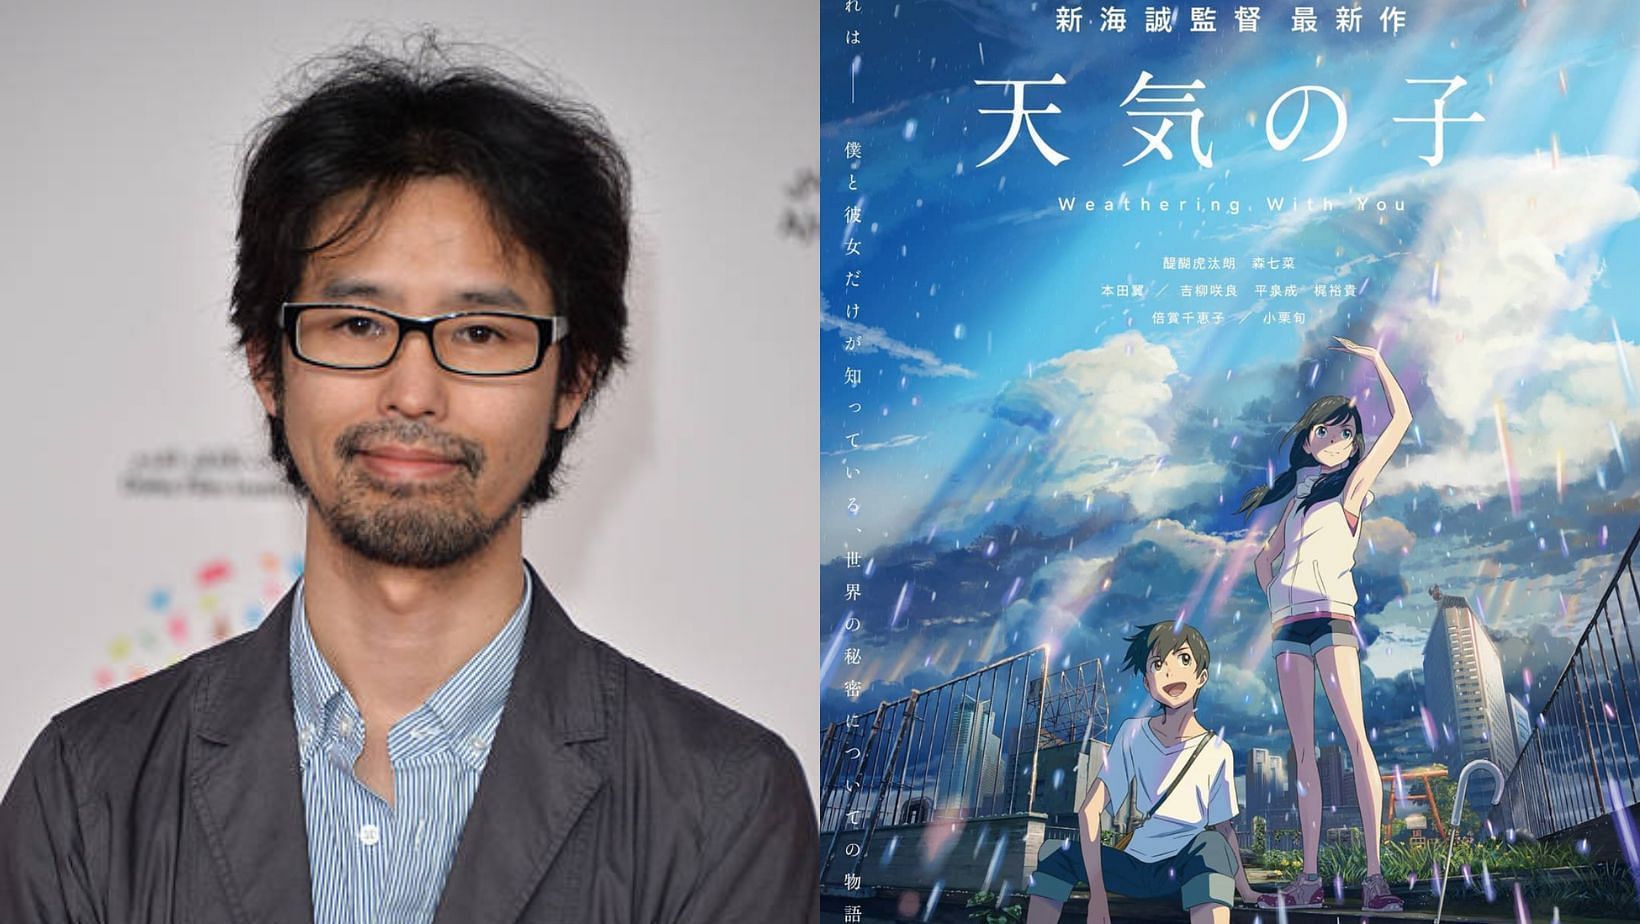 Producer Koichiro Ito of popular animes Your Name &amp; Suzume arrested for allegedly persuading a minor to send inappropriate pictures. (Images via Instagram/@makoto.shinkai &amp; Getty Images/Andrew H. Walker / Staff)